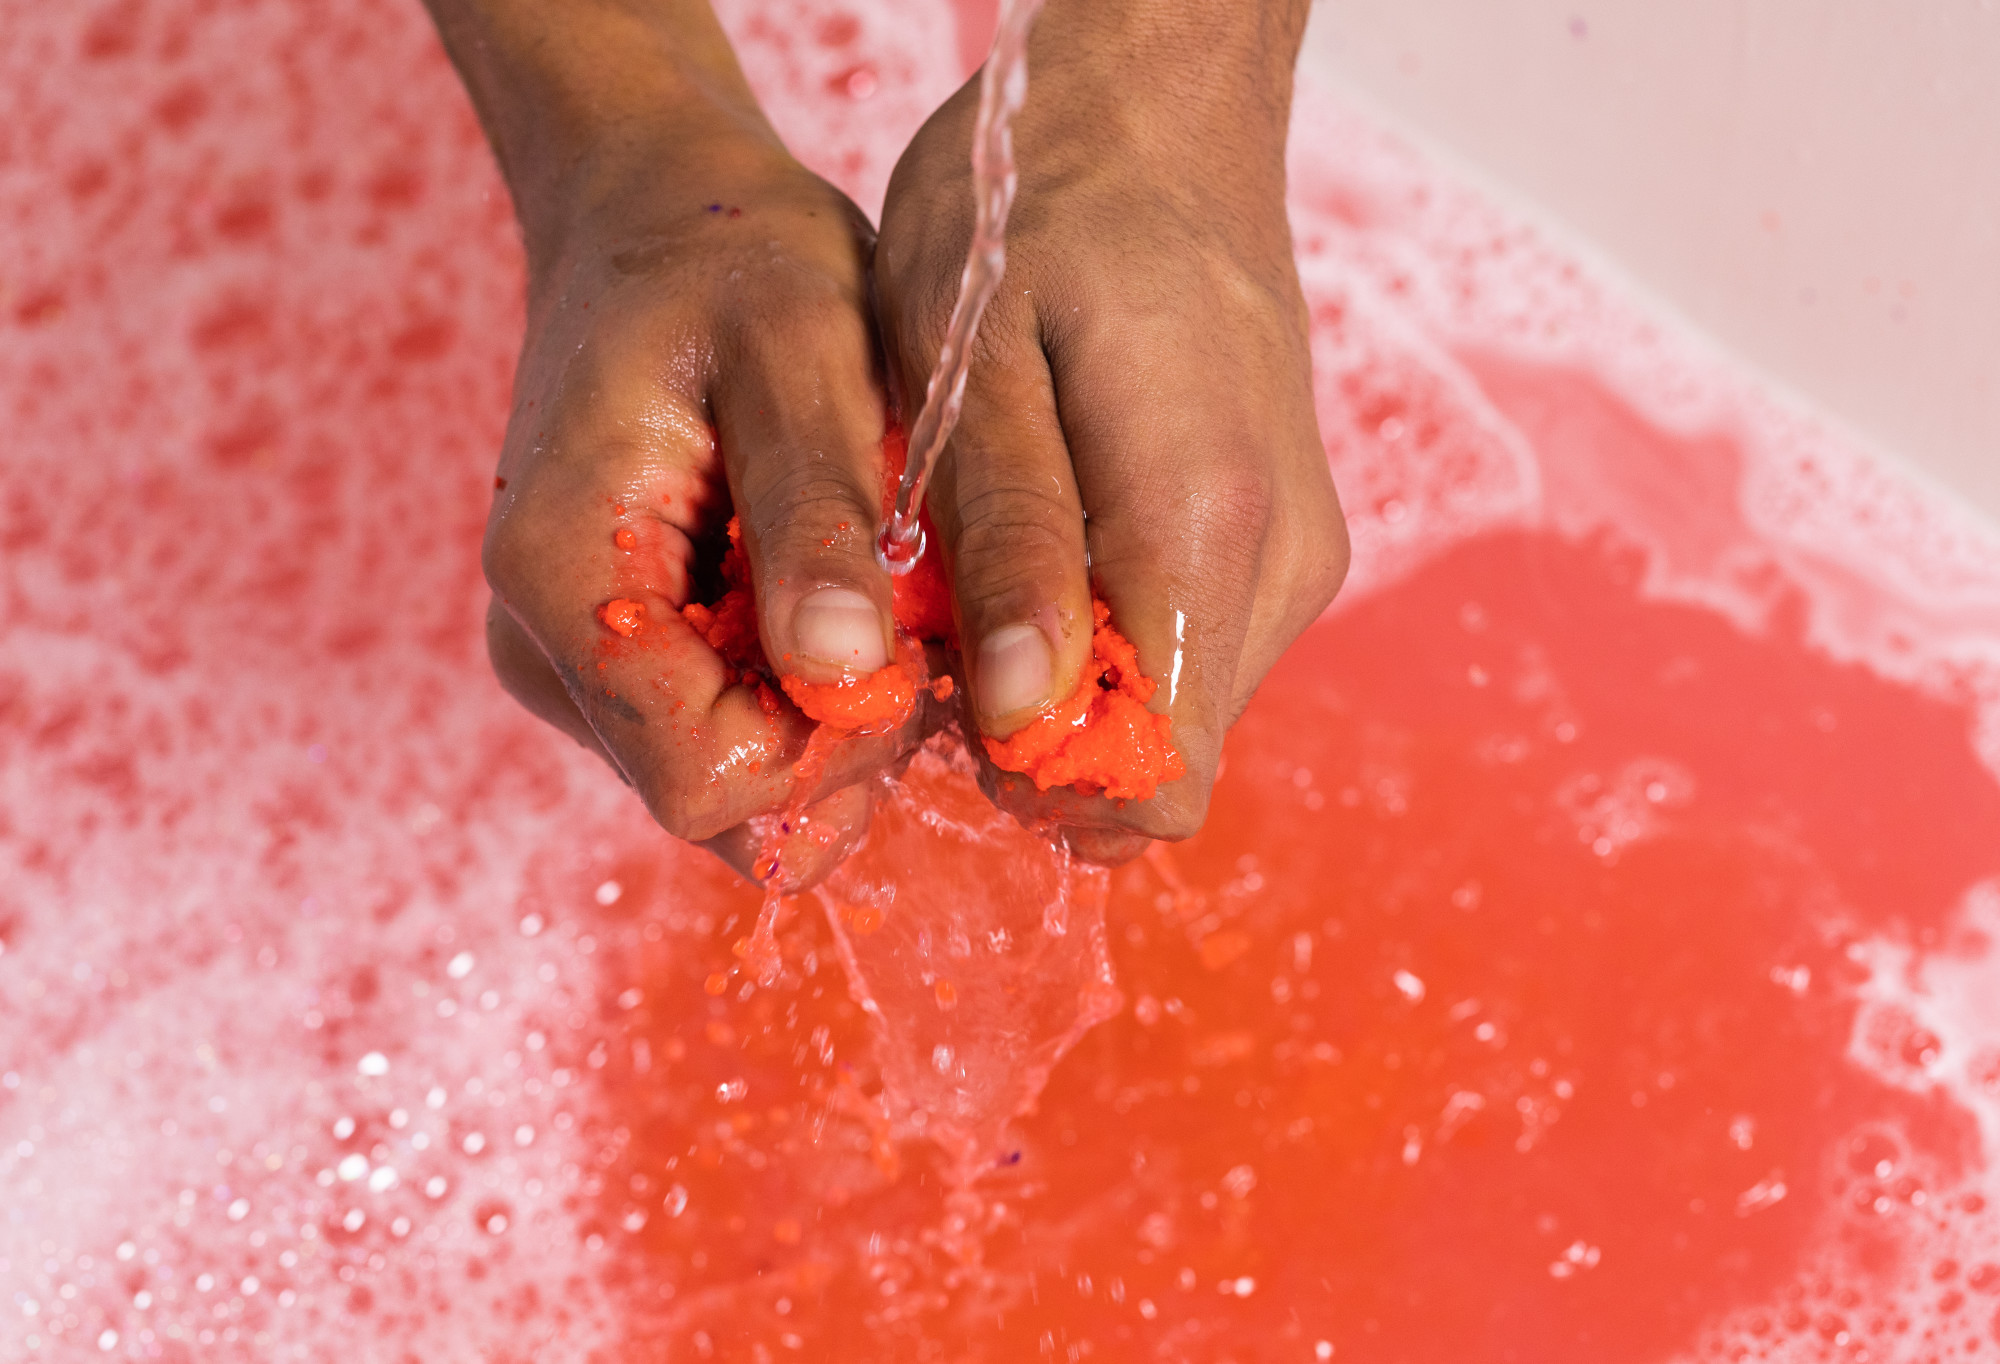 Two hands crumbling a red bubble bar under a slow running tap, adding to bubbles in a bath filled with bright, pinky red water.